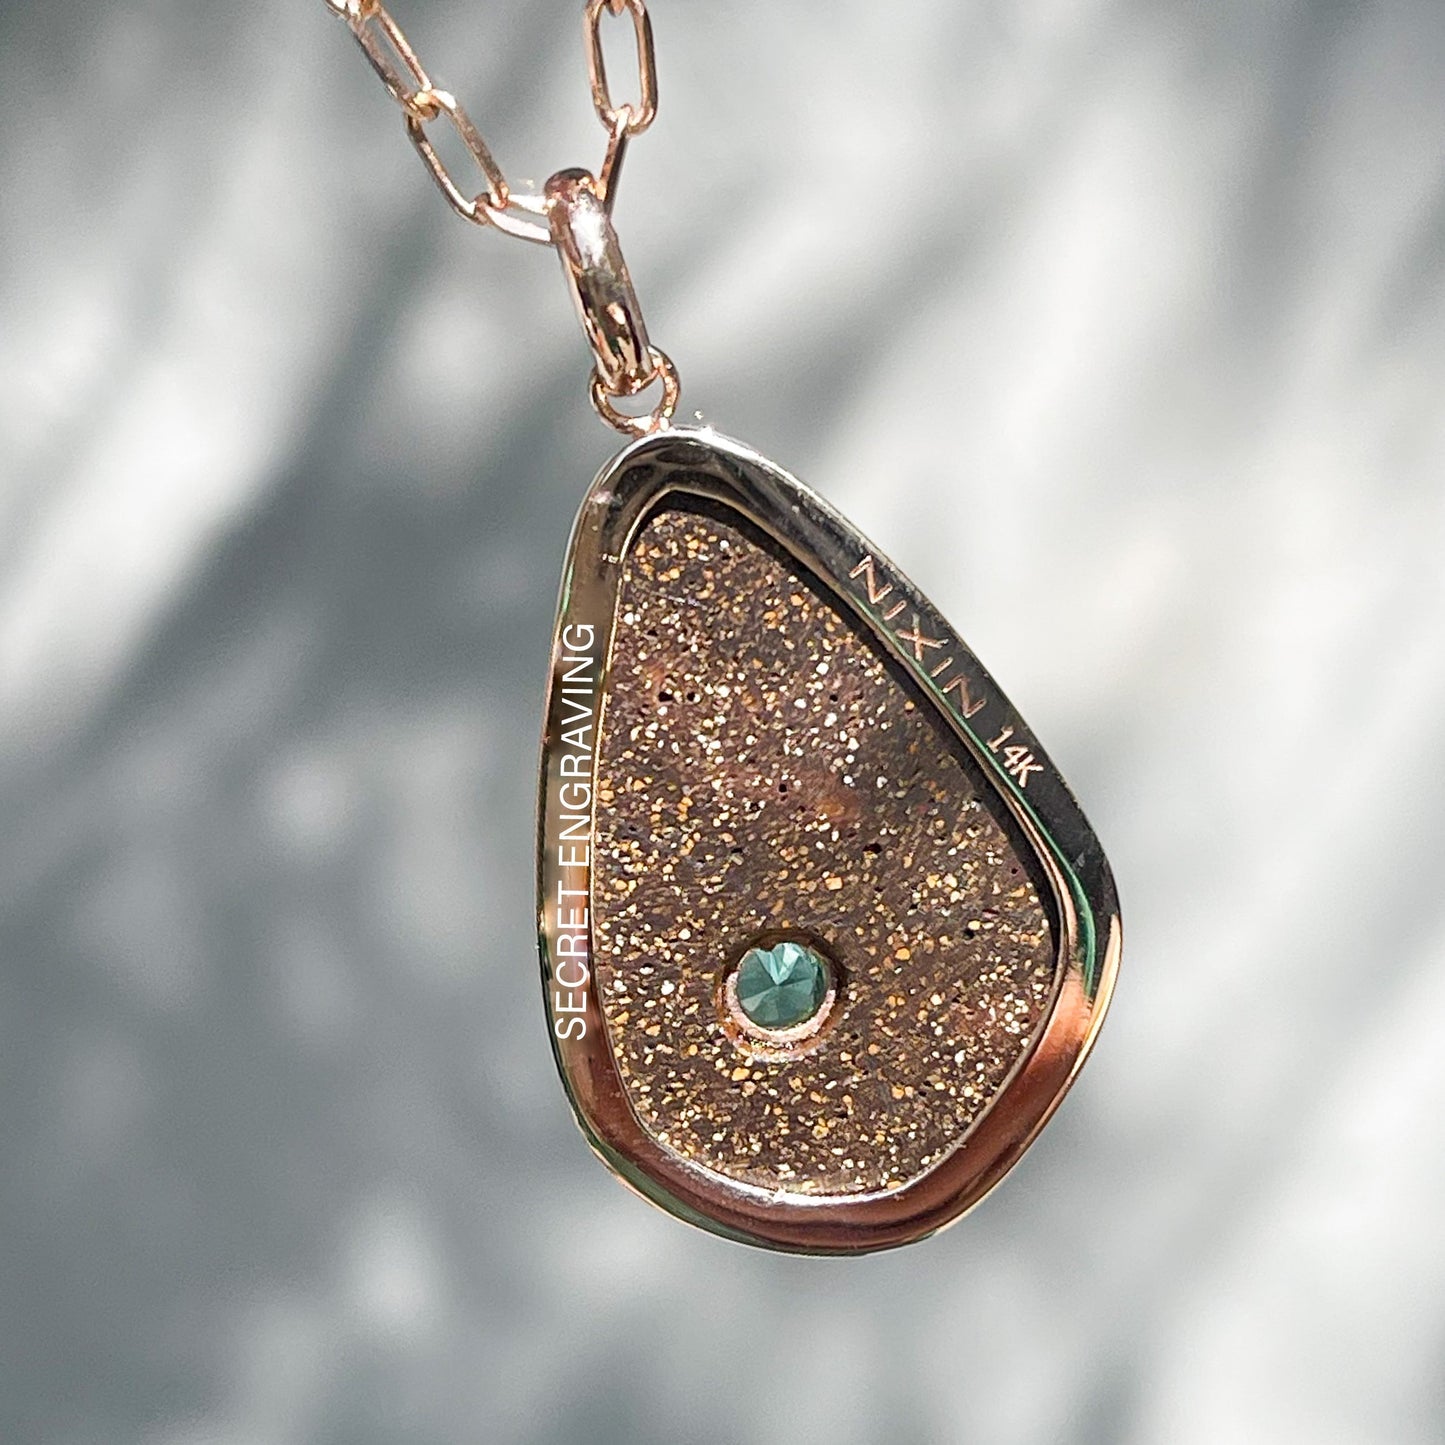 The back of an Australian Opal Necklace by NIXIN Jewelry hanging in front of a grey wall. The image shows where a secret engraving rests on the back of the bezel setting of the opal pendant necklace.